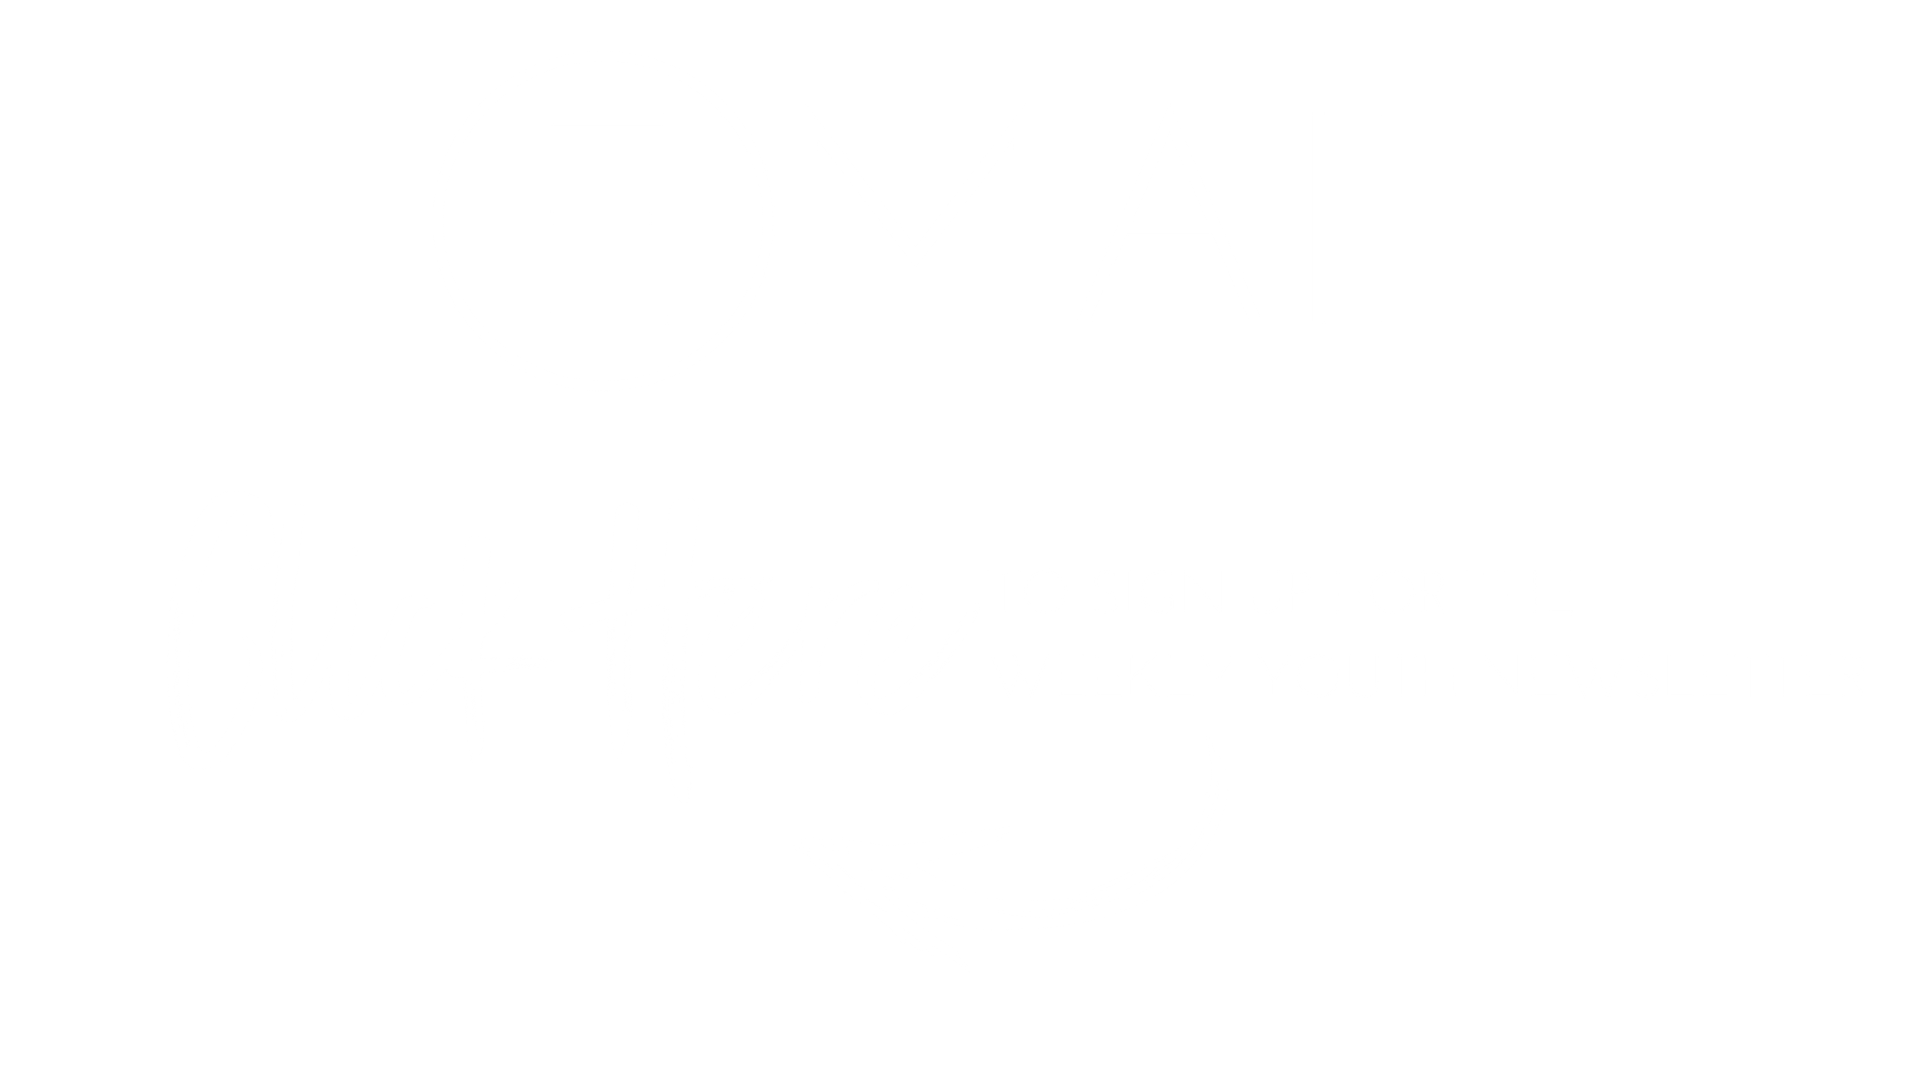 Newsletter sign up pic